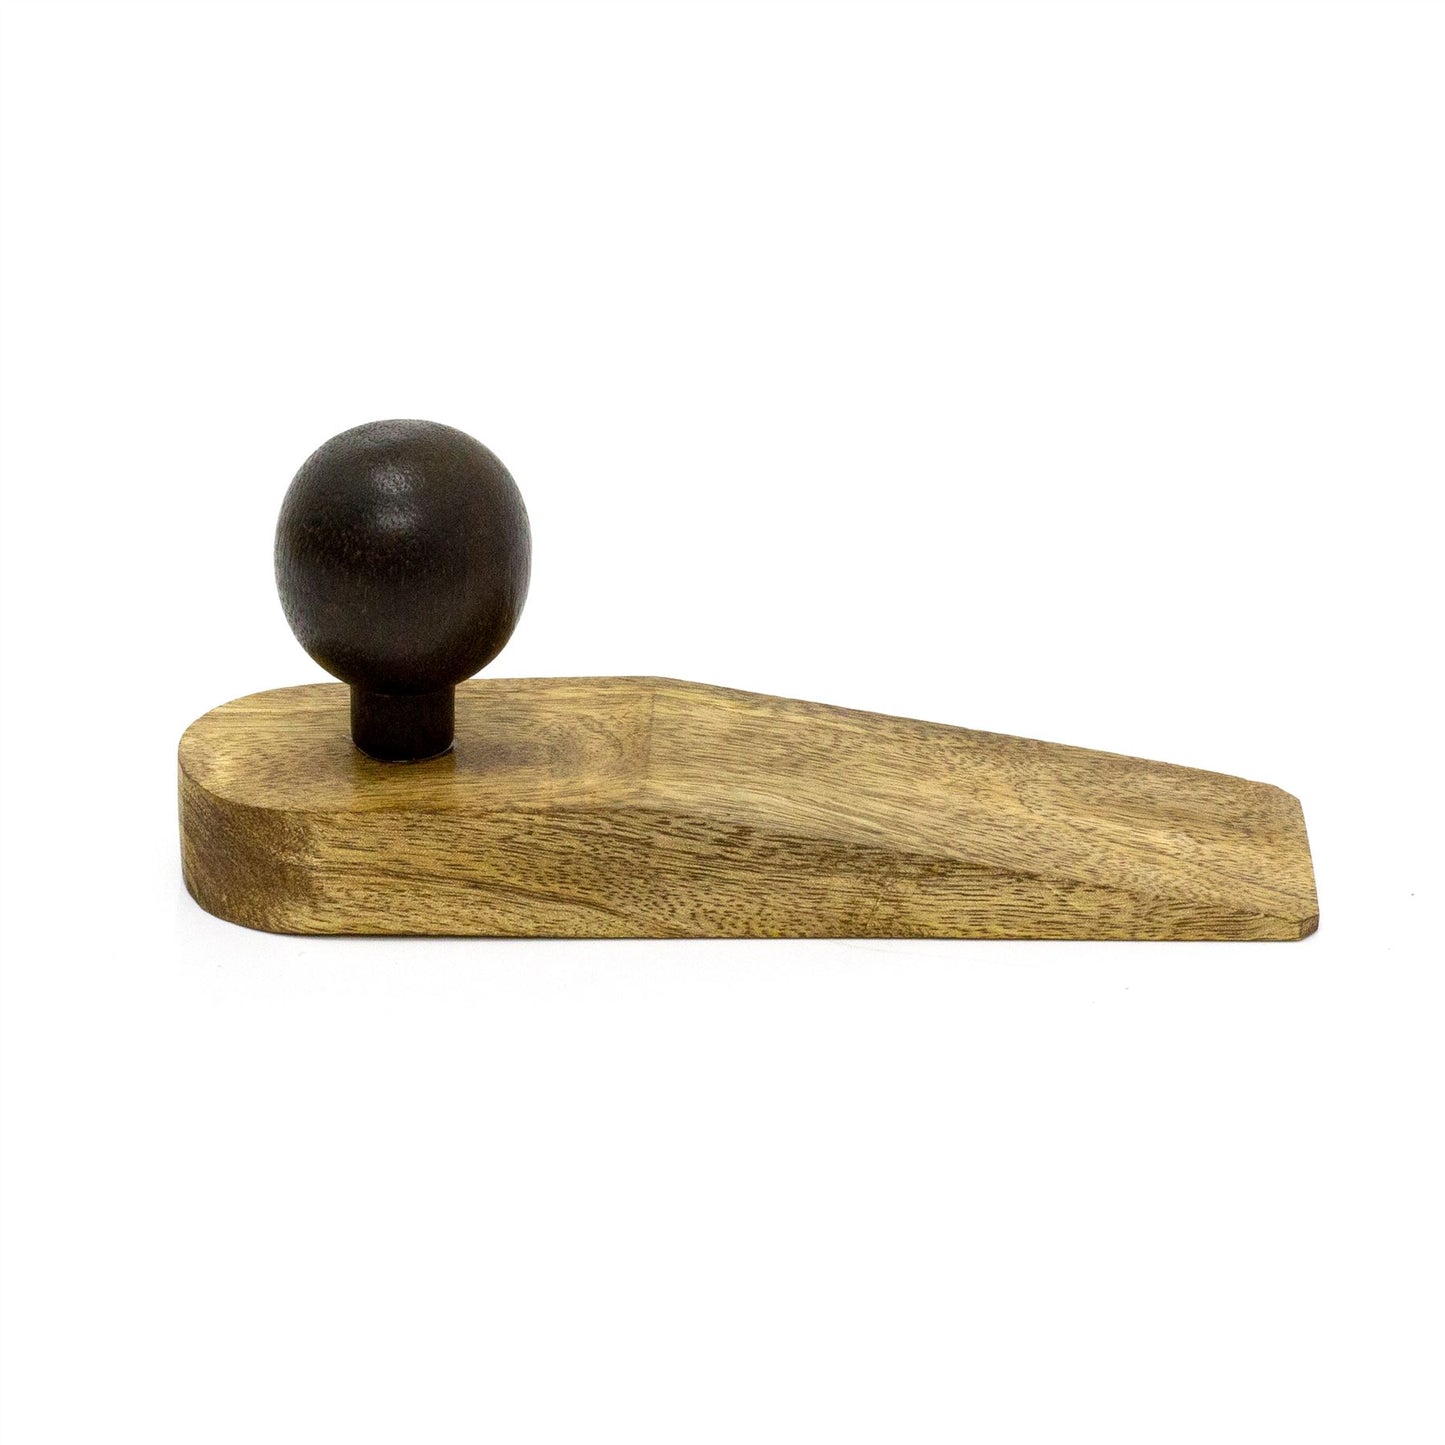 Traditional Wooden Door Stop Wedge | Mango Wood Decorative Door Stopper Wedge | Floor Door Stop Doorstop Wedge - Colour Varies One Supplied